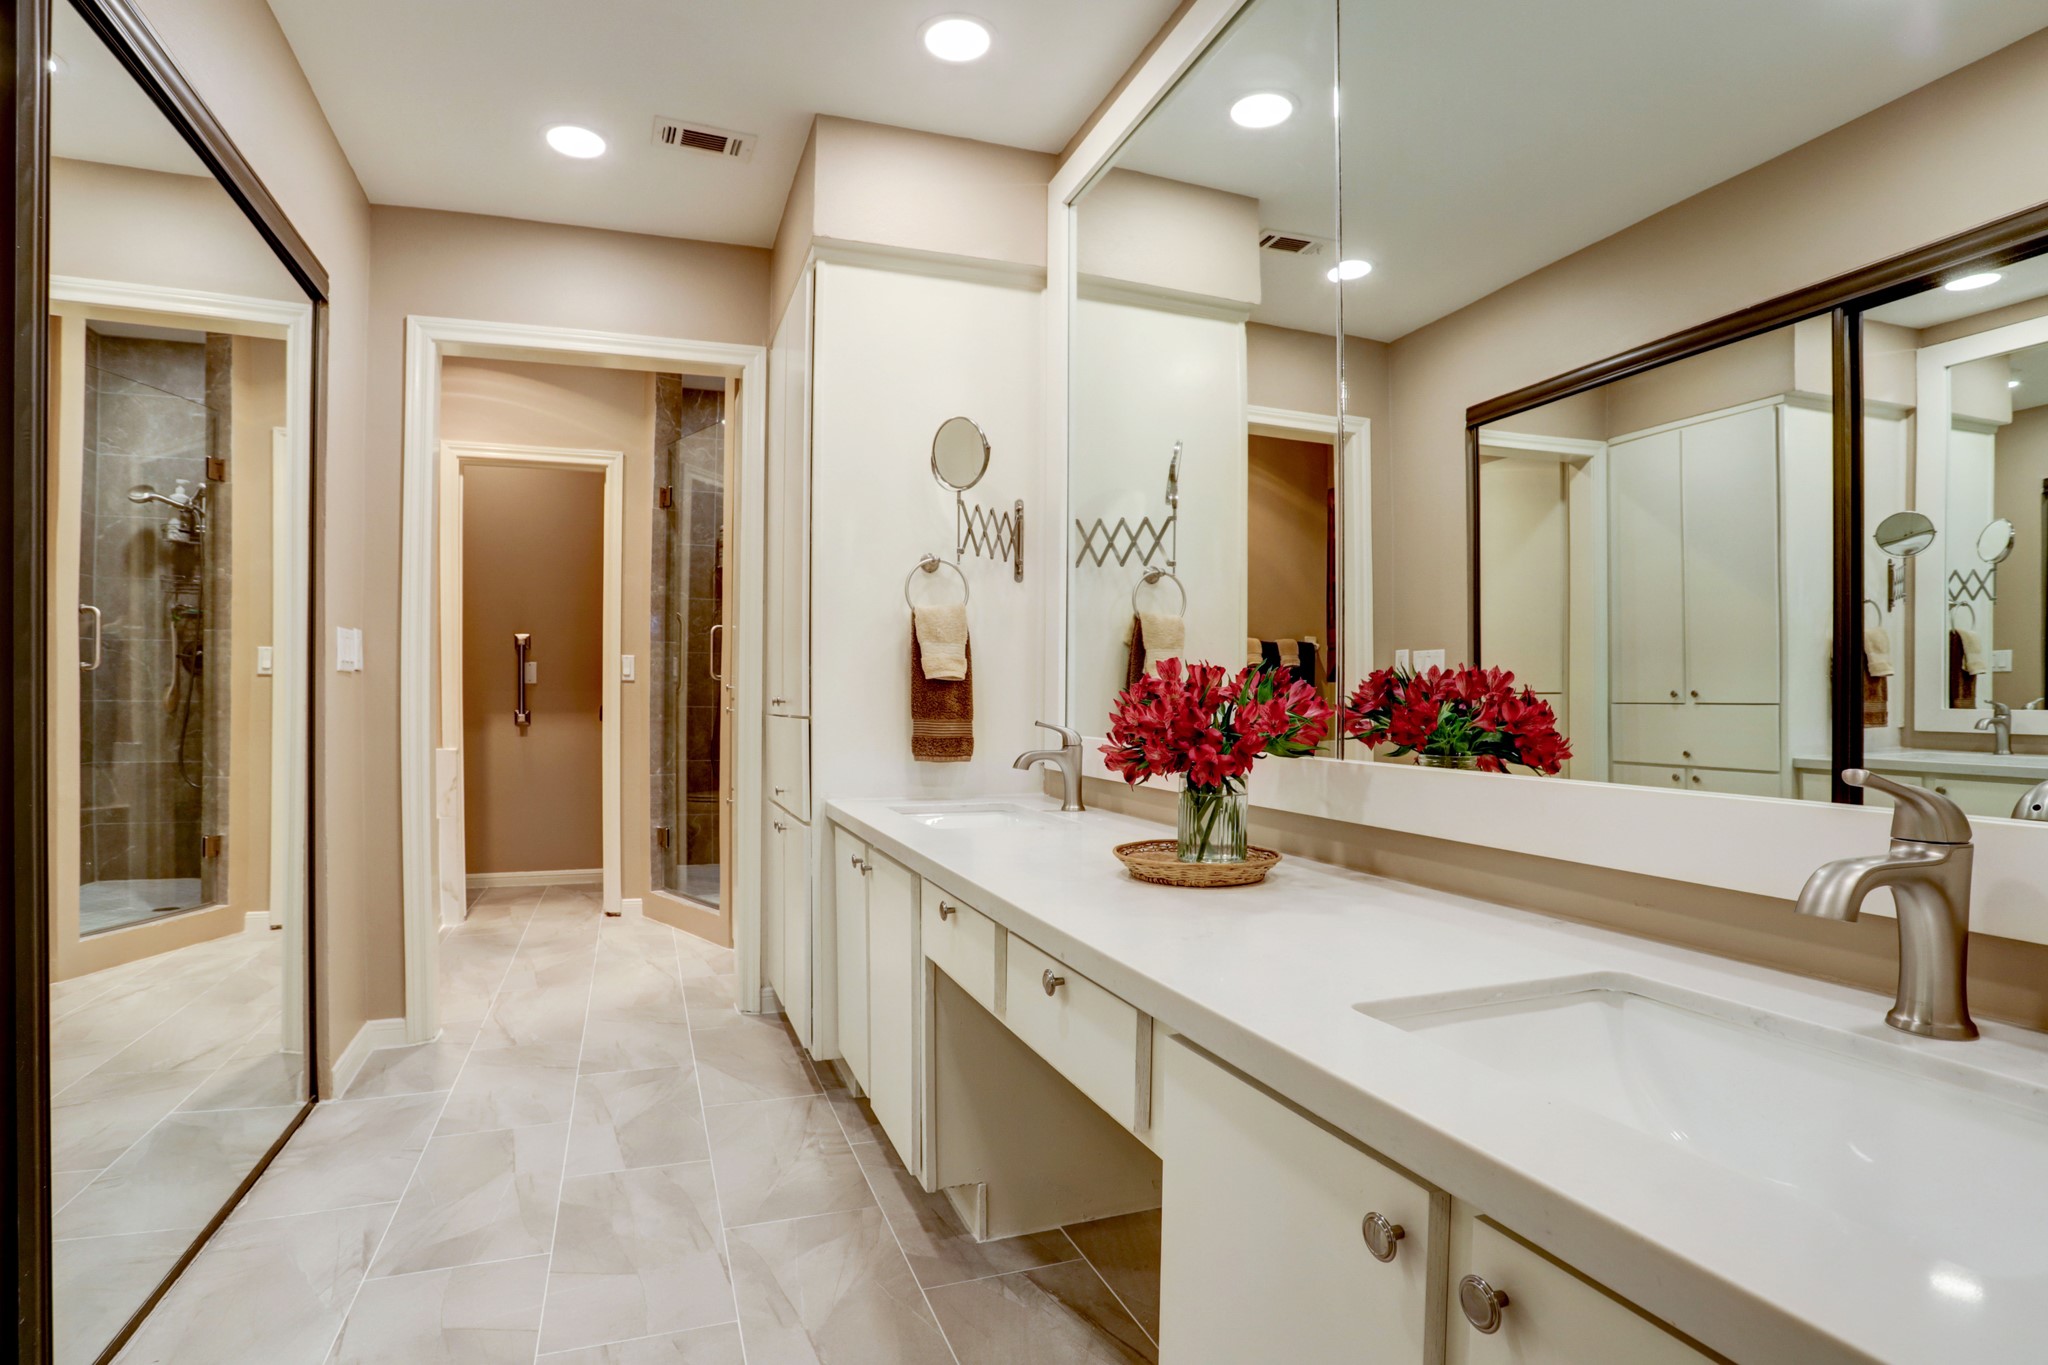 Spacious primary bathroom with double vanity, spa tub and walk-in shower